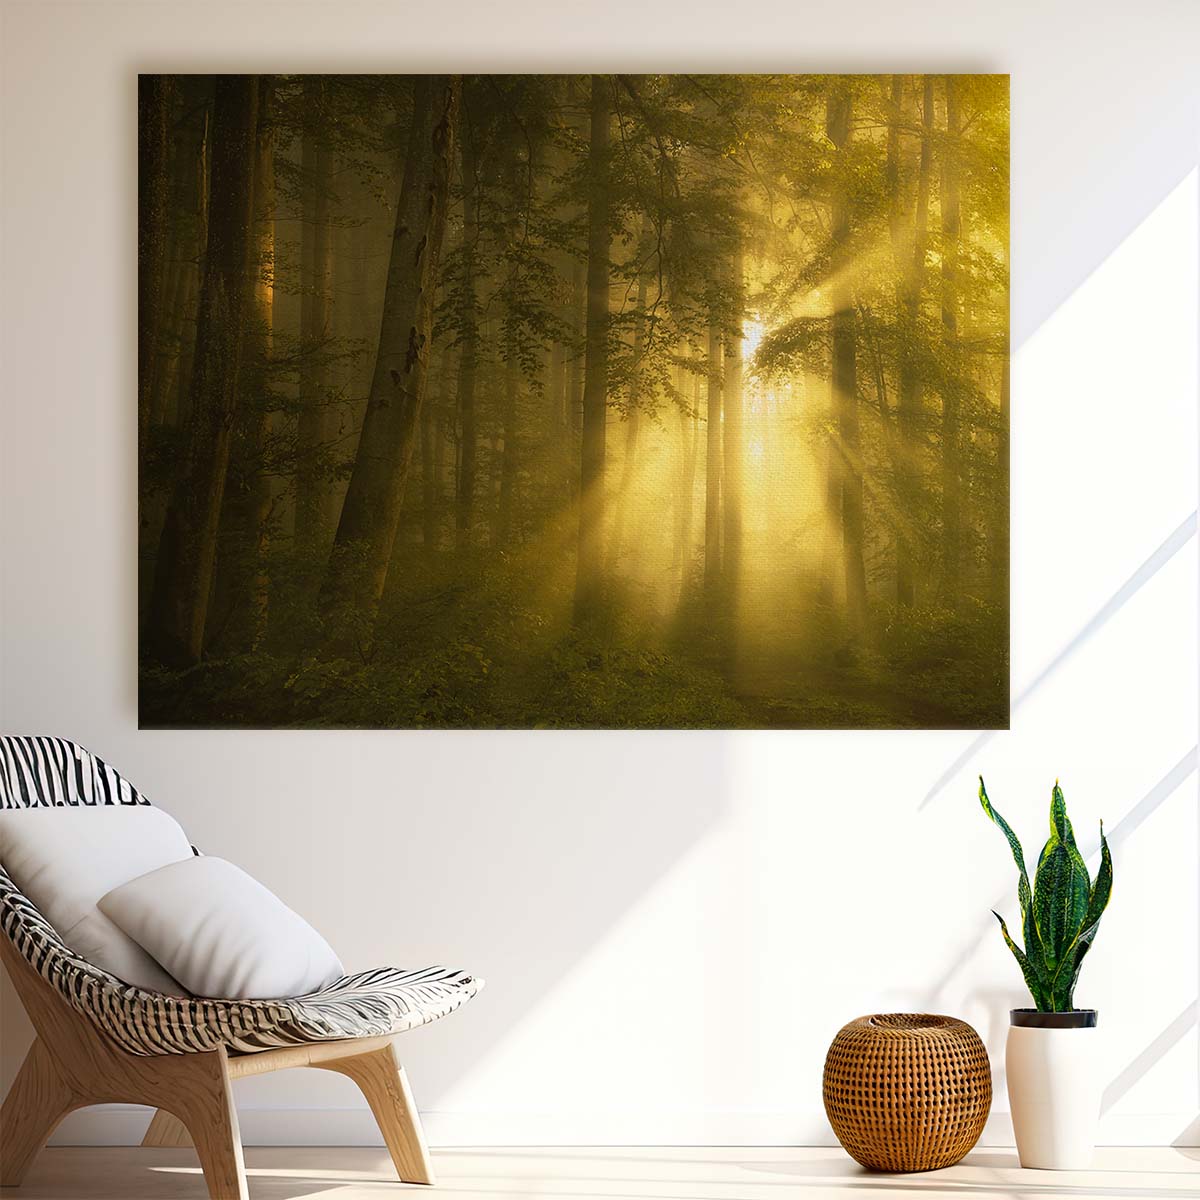 Sunrise Misty Forest Rays Landscape Wall Art by Luxuriance Designs. Made in USA.